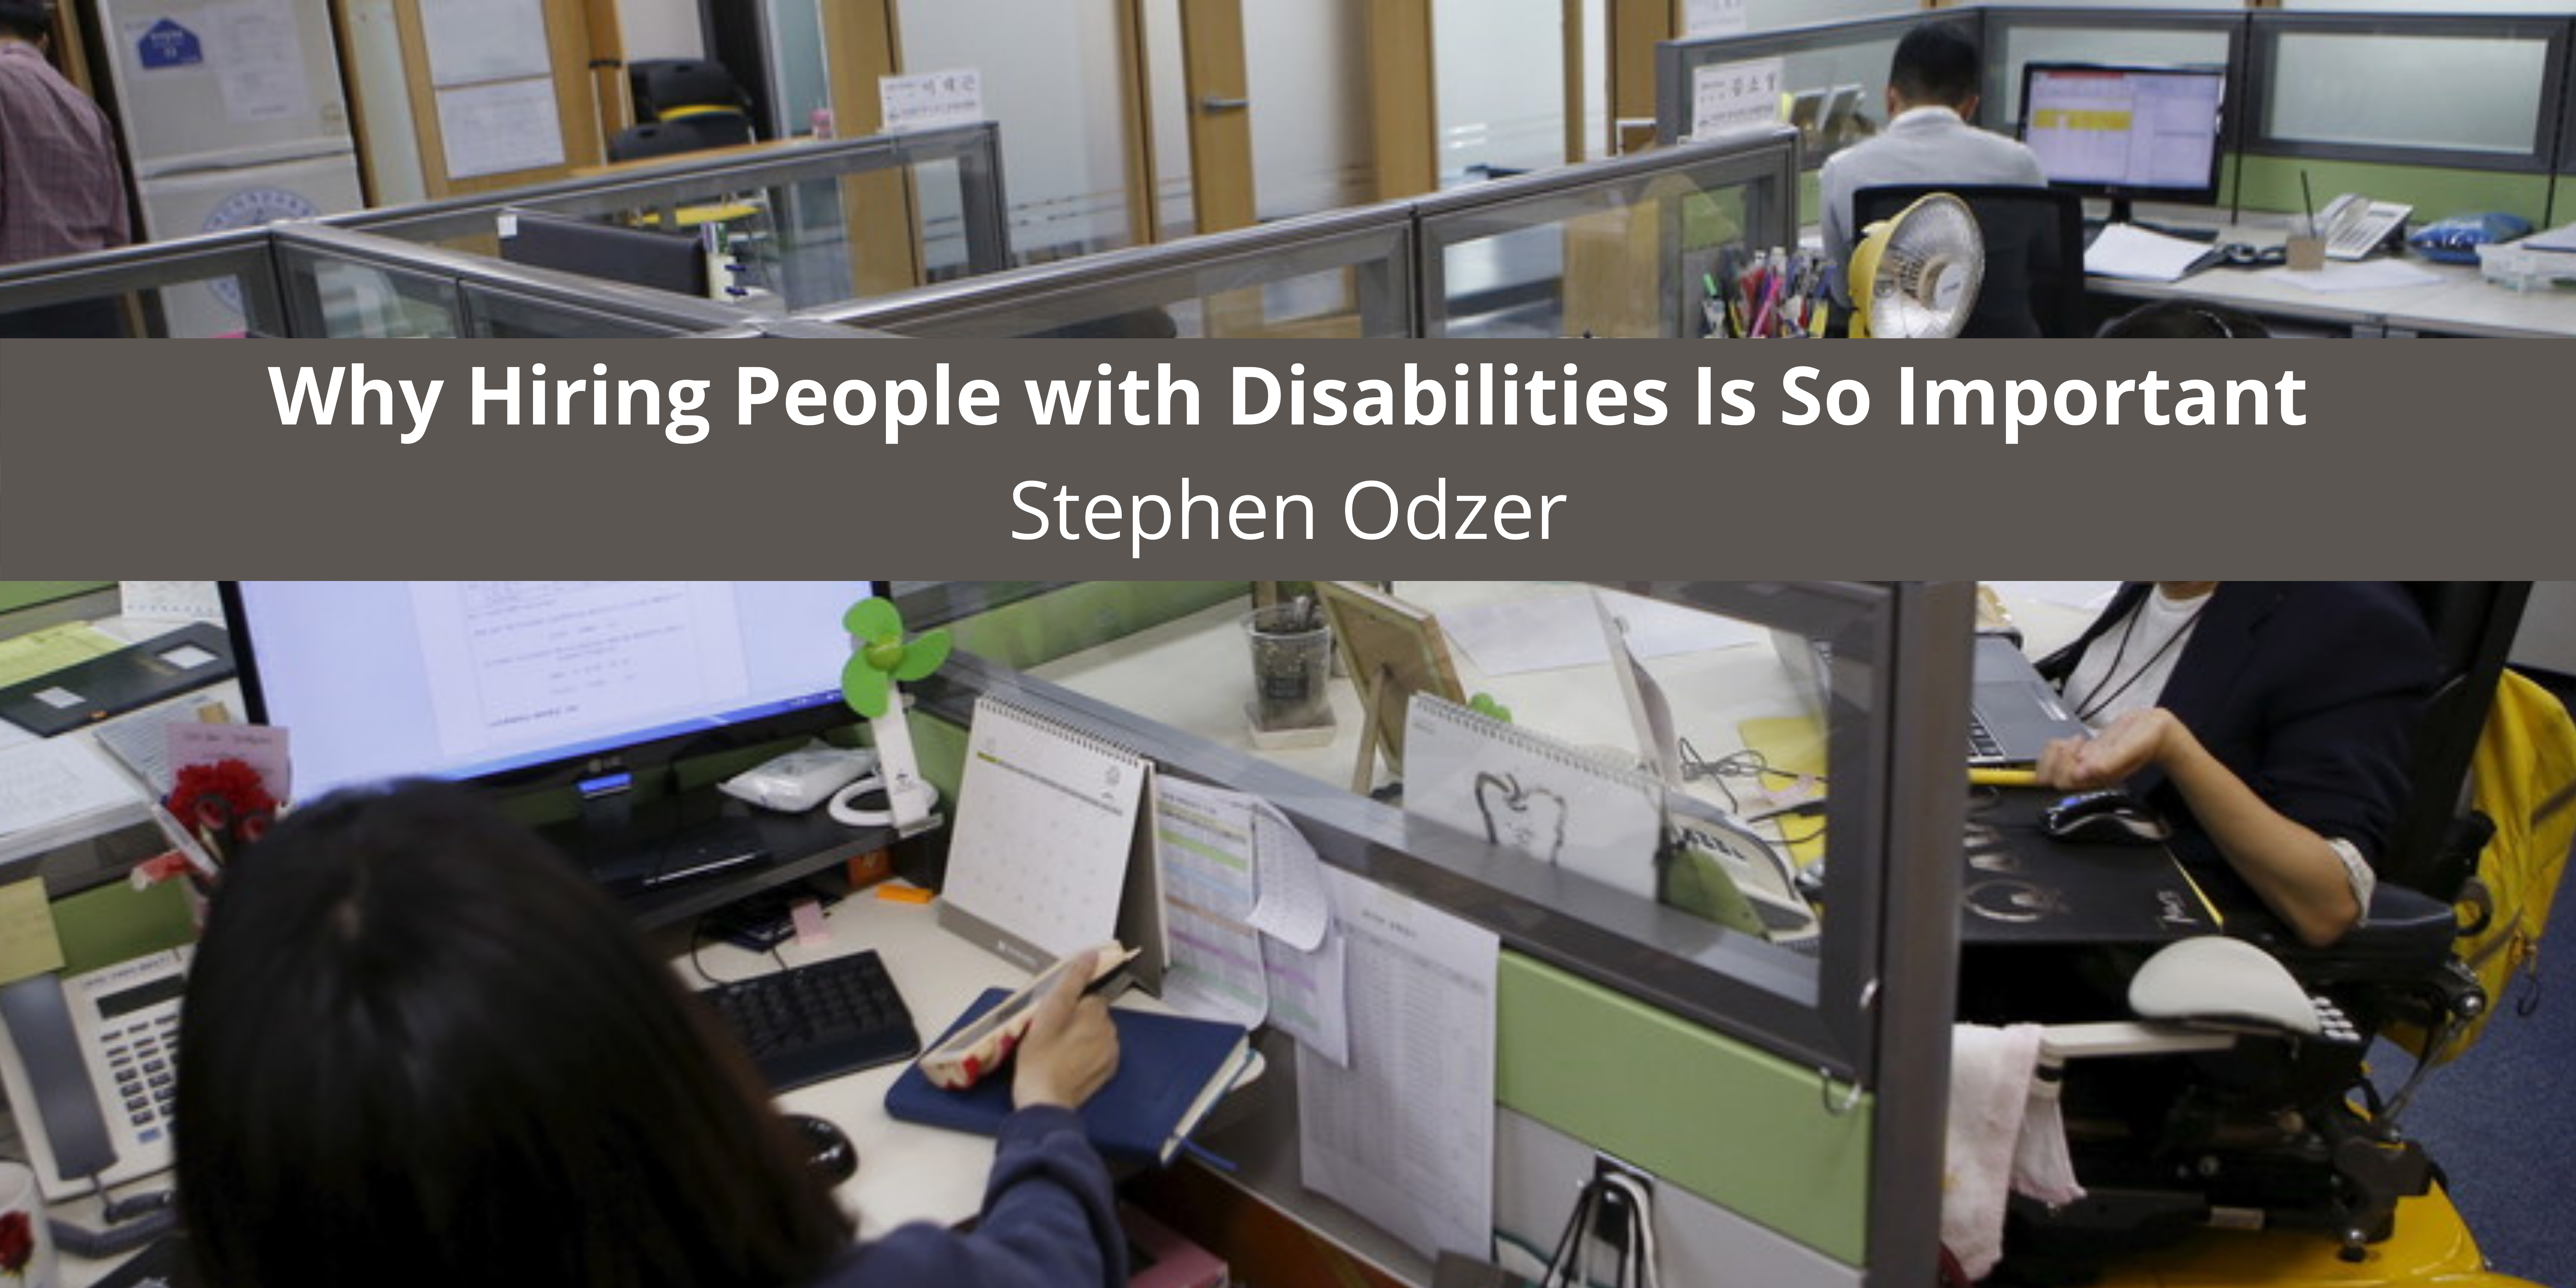 Stephen Odzer of Cedarhurst, NY Looks at Why Hiring People with Disabilities Is So Important